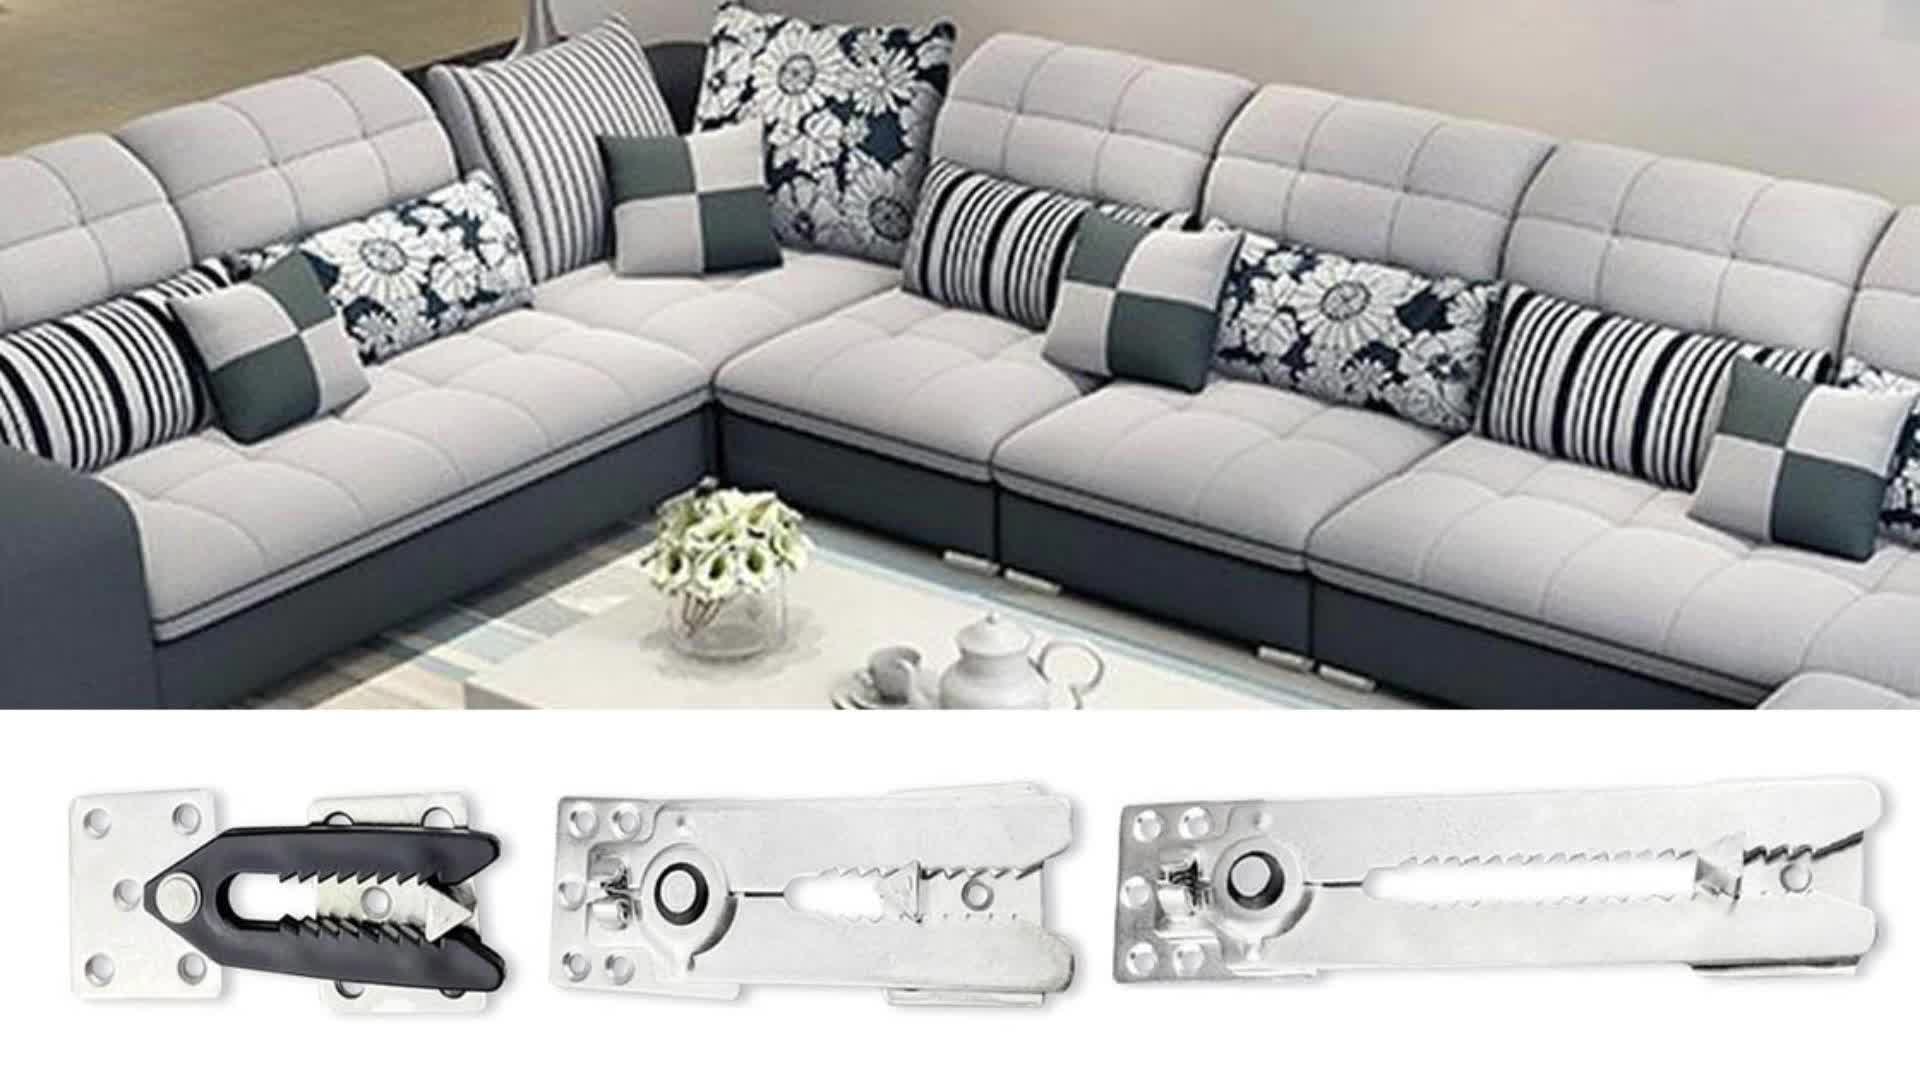 2 Pcs Silver Tone Snap Style Sofa Sectional Couch Connectors - Silver Tone - 2.1 x 1.2(L*W)